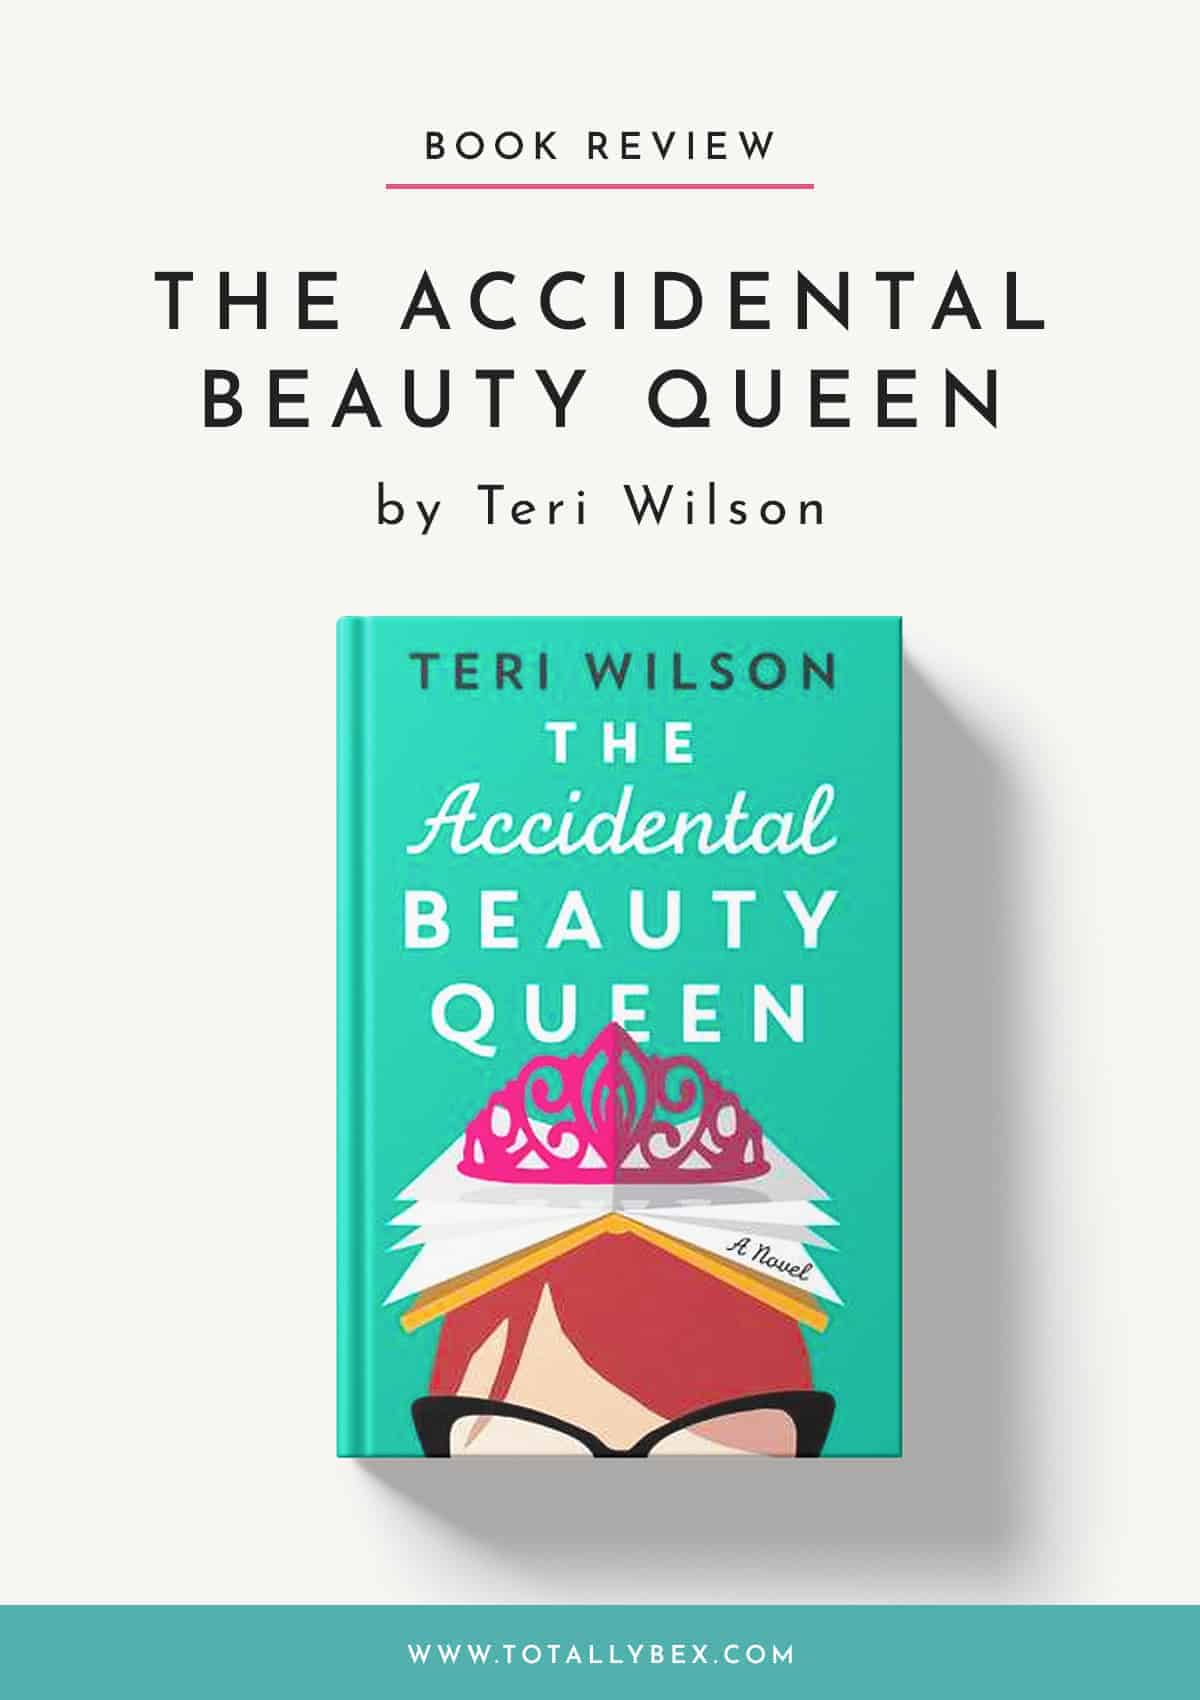 The Accidental Beauty Queen by Teri Wilson is a light and quick read with quirky characters. Miss Congeniality meets The Parent Trap twin swap shenanigans!